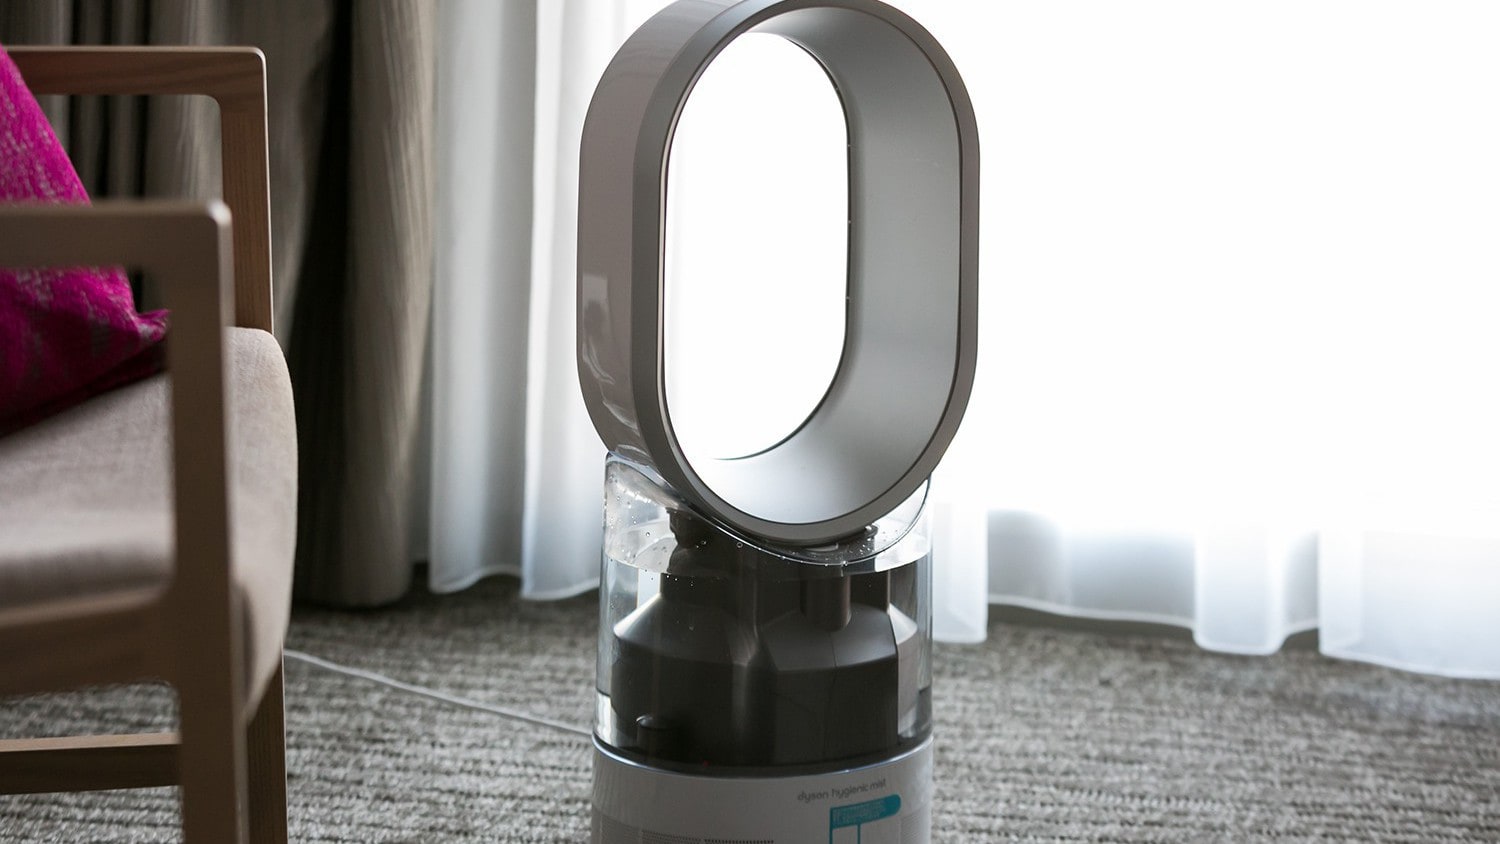 Common to all rooms / Dyson Hygienic Mist Humidifier